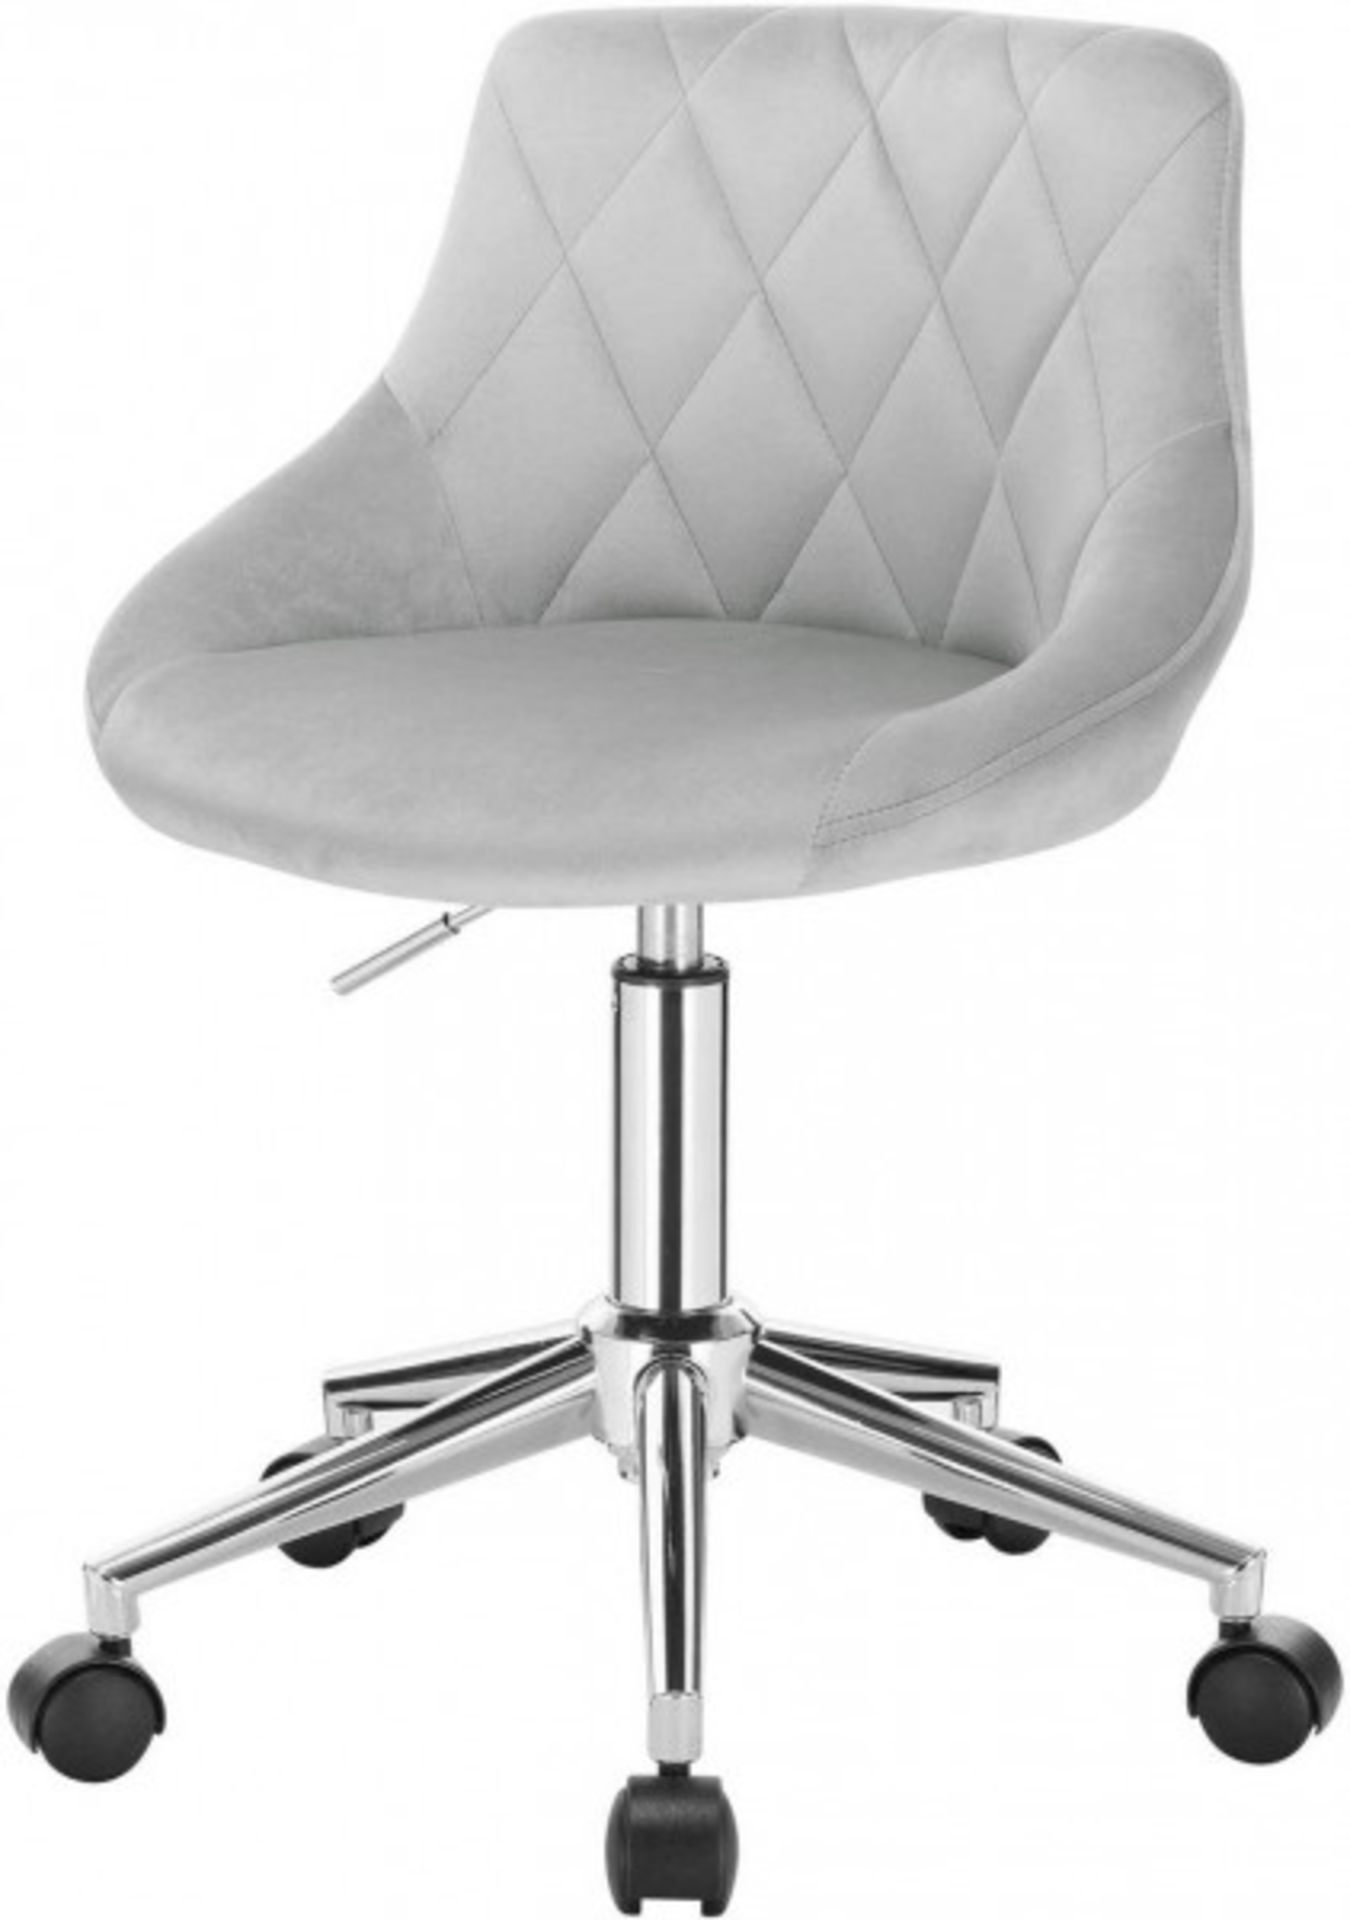 BOXED PORTHOS HOME GAS LIFT SWIVEL BAR STOOL GREY MODEL: AT020 A GRY RRP £67.38 (AS SEEN IN